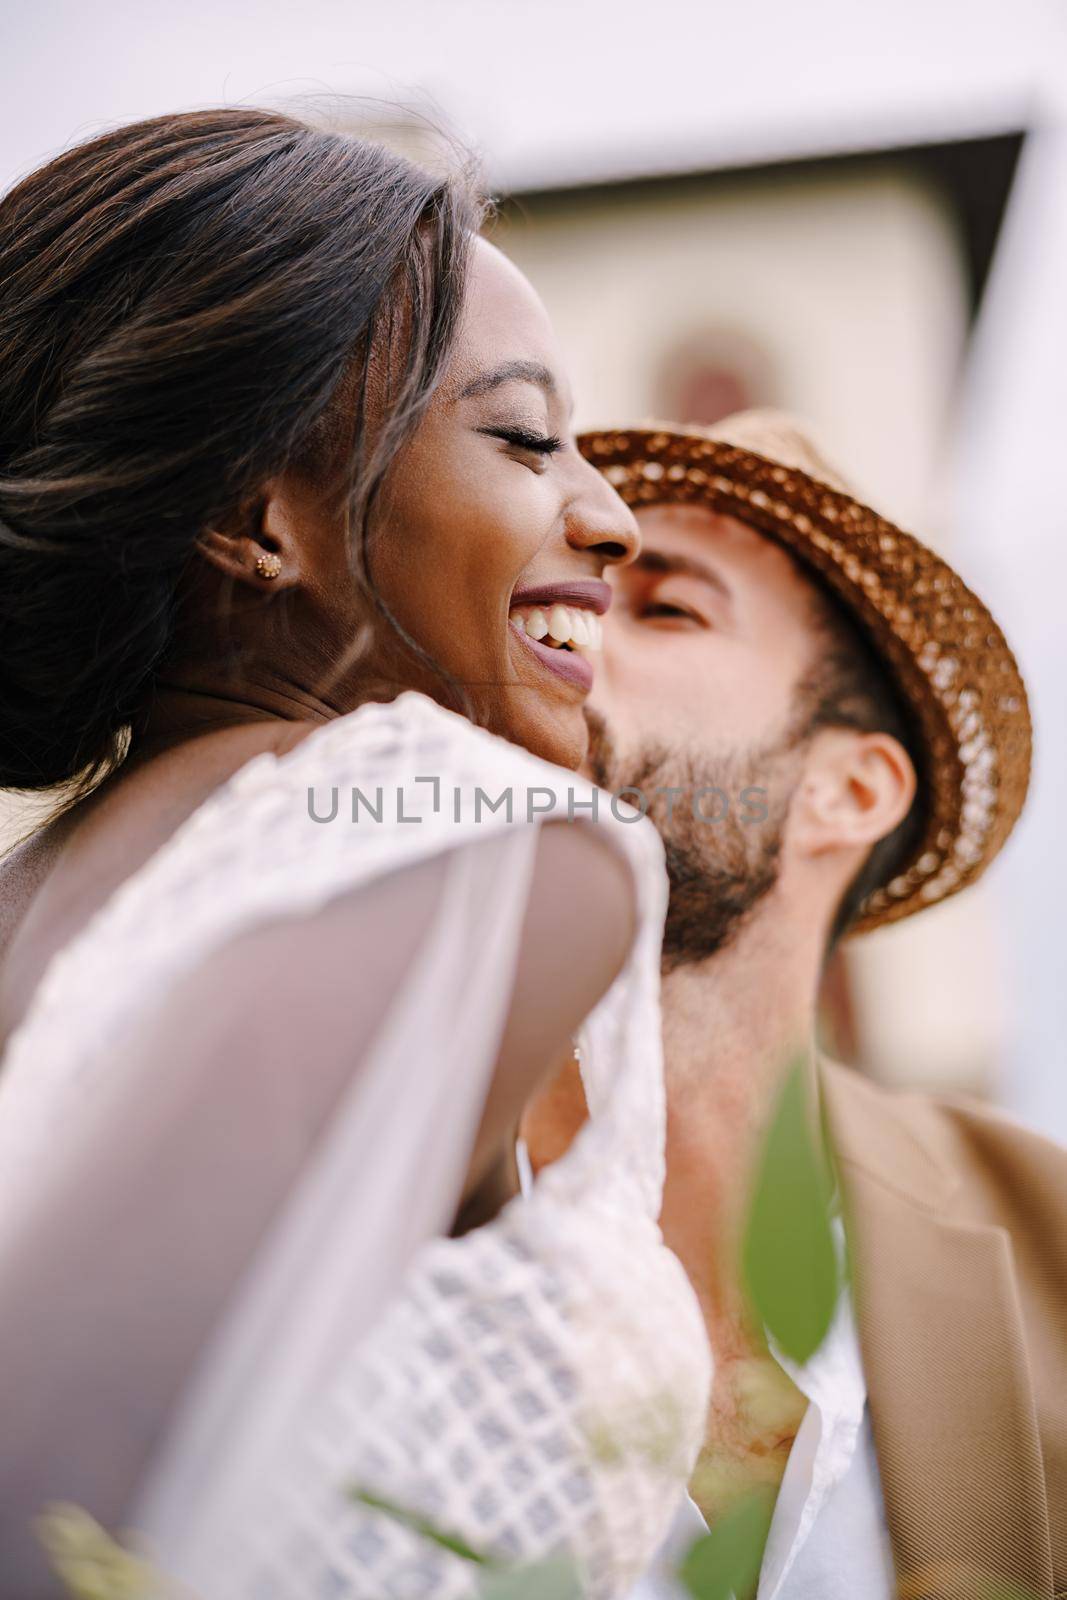 A close-up of portraits of an African-American bride and Caucasian groom in a straw hat. Interracial wedding couple. Wedding in Florence, Italy.